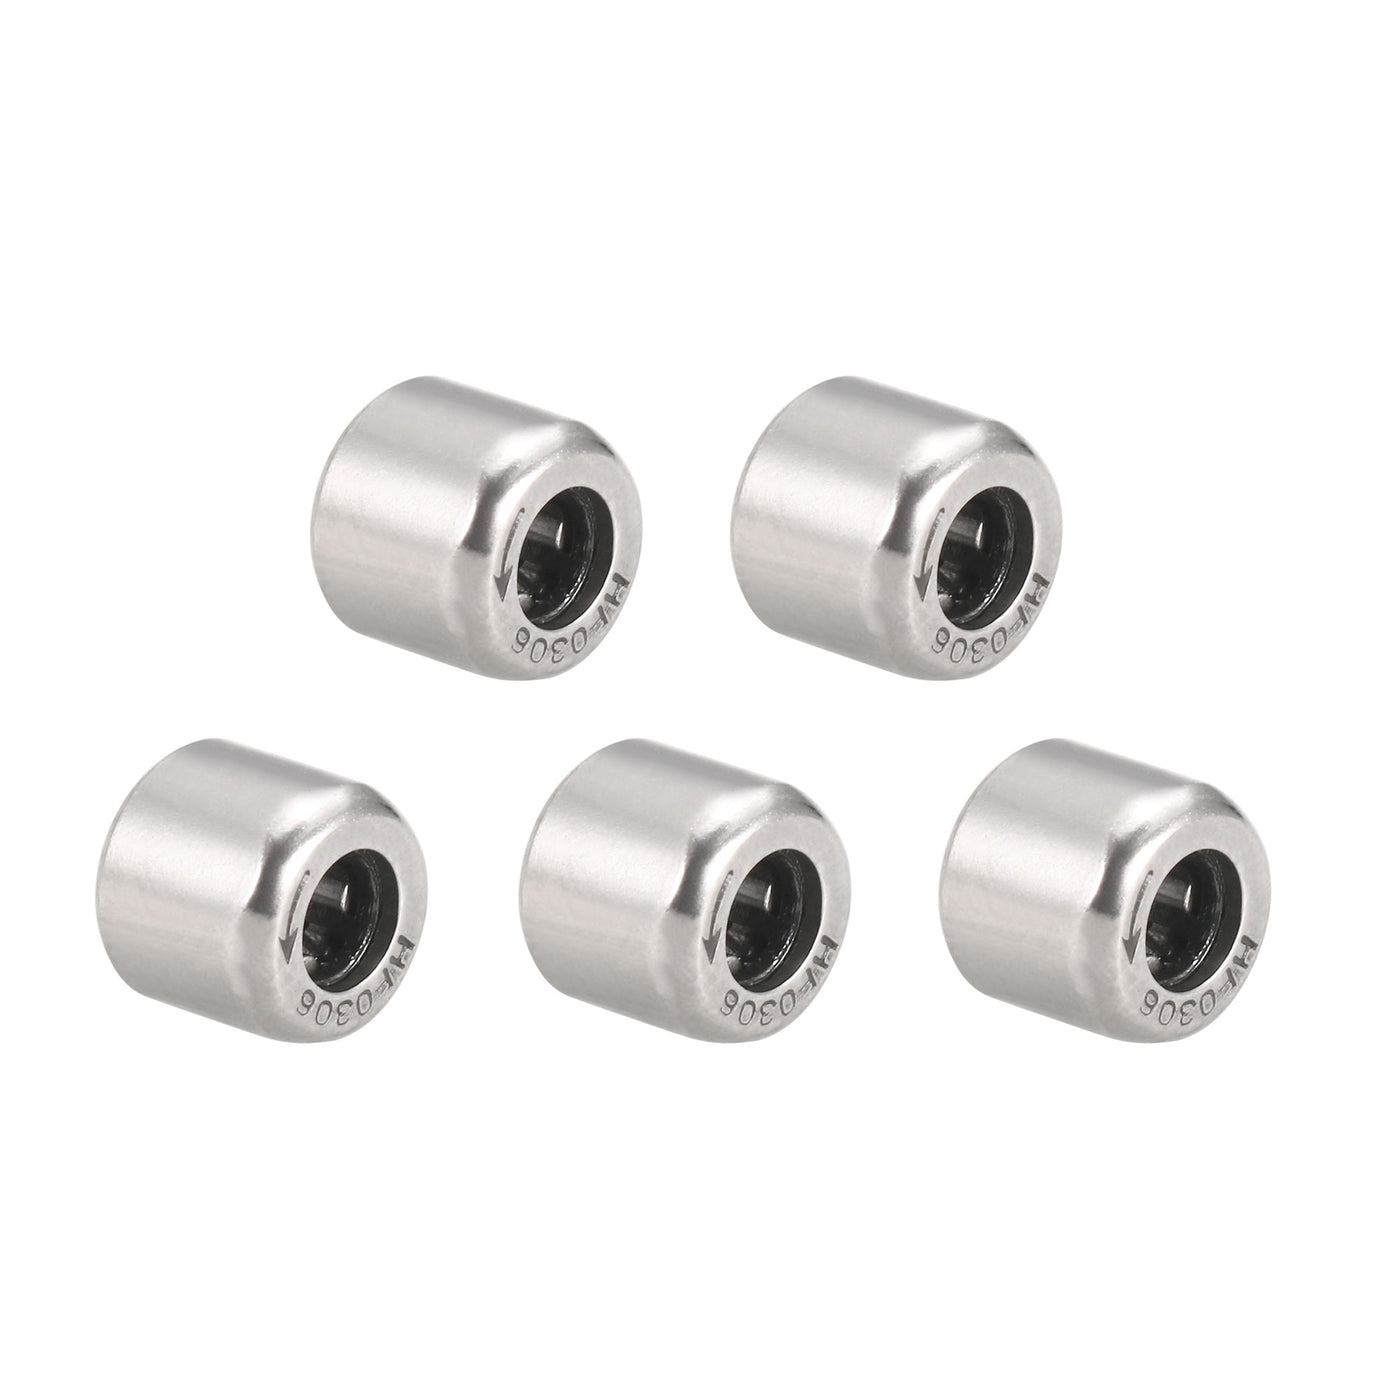 uxcell Uxcell Needle Roller Bearings 3mm x 6.5mm x 6mm Chrome Steel One Way Bearing 5pcs